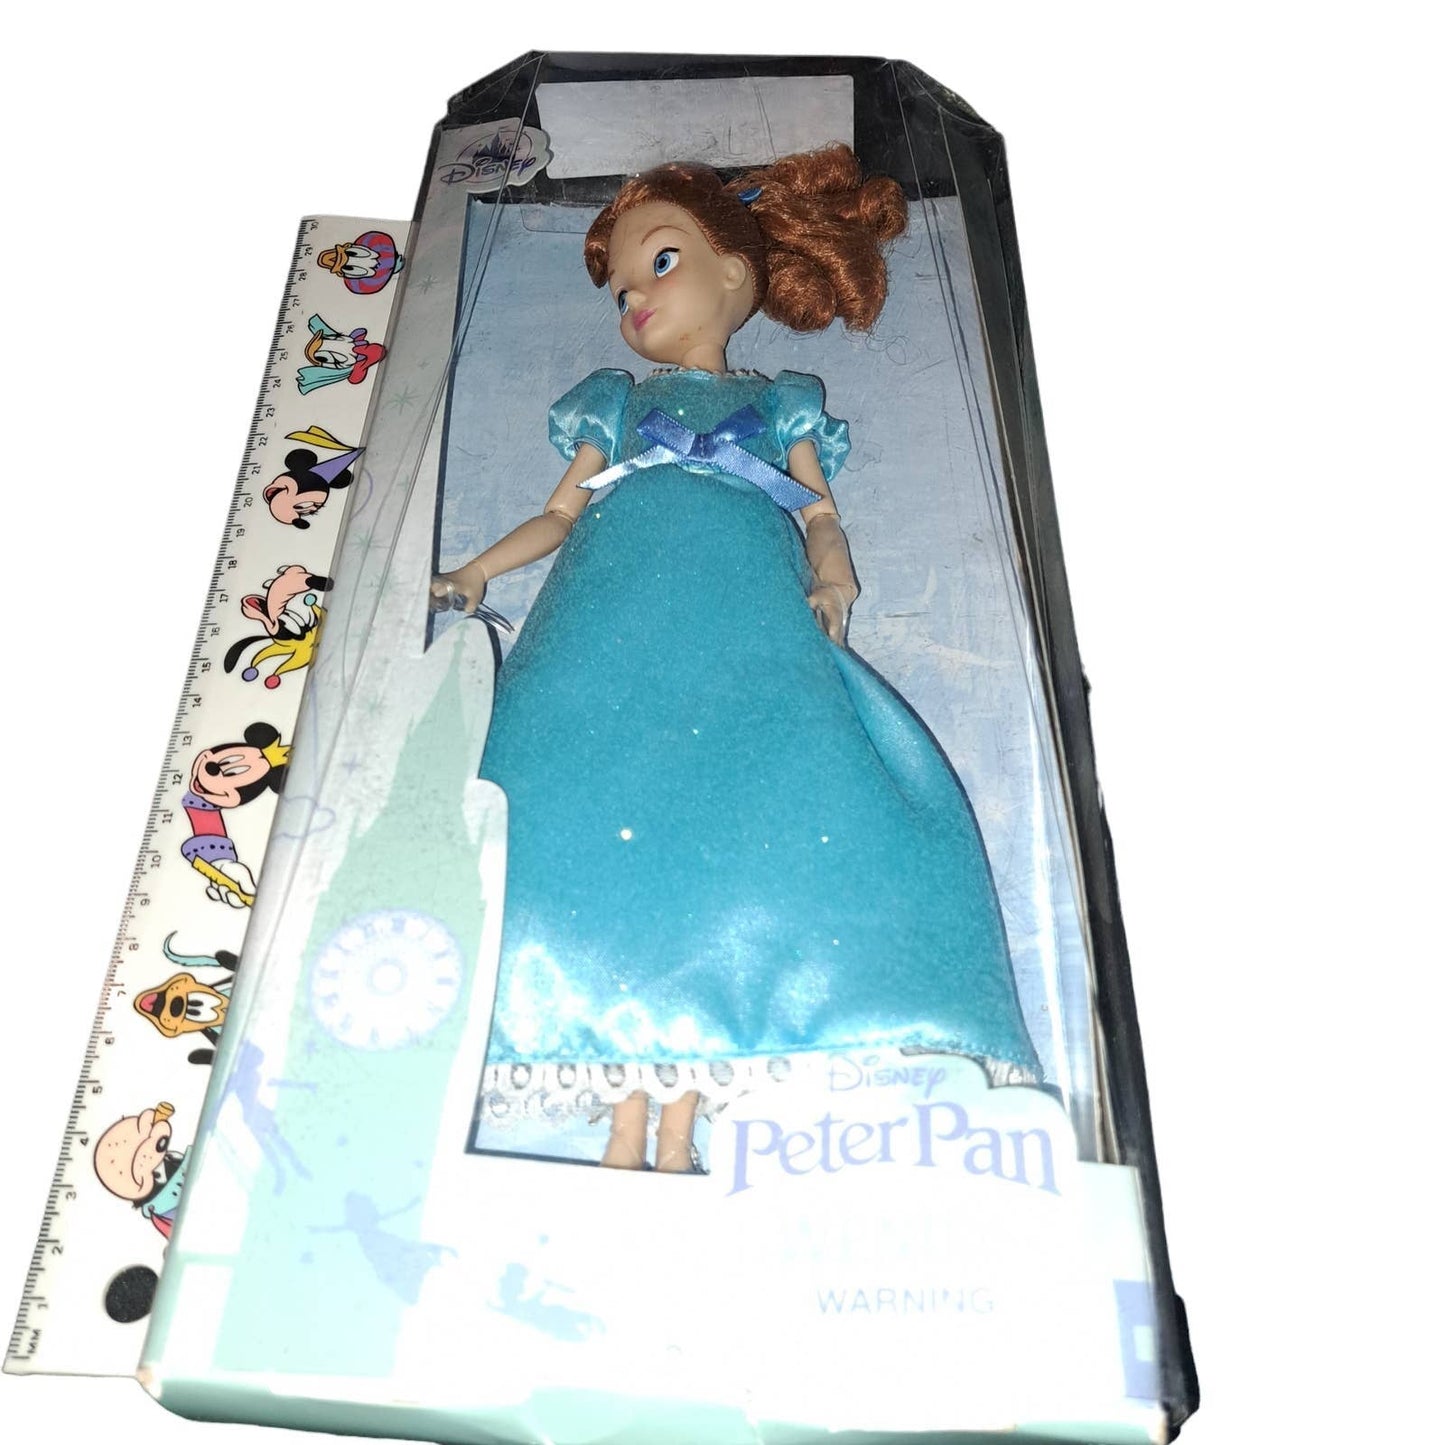 NIB - Classic Collectible Wendy from Peter Pan 12 inch Doll